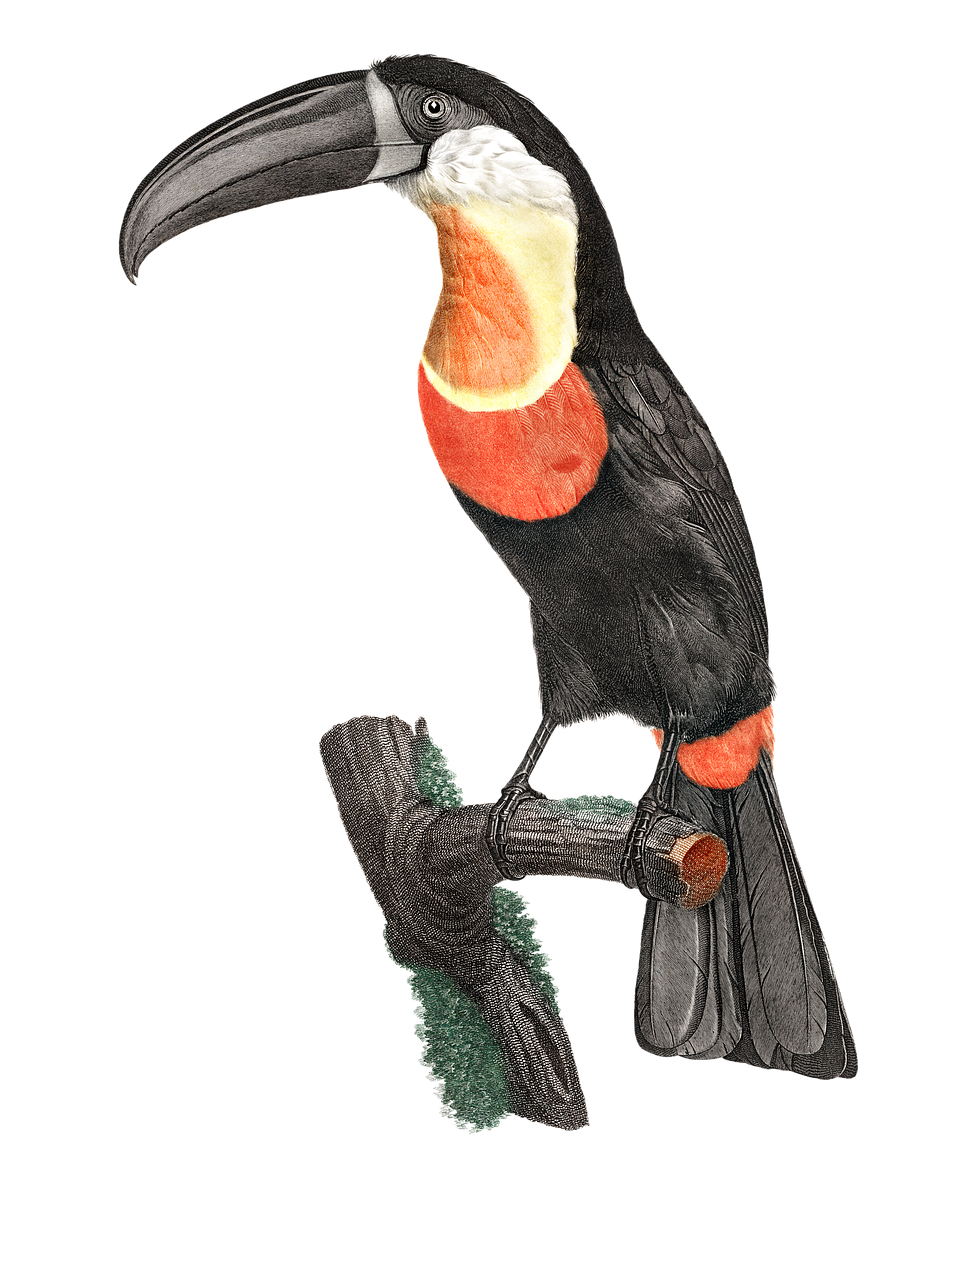 a close up of a bird on a branch, an illustration of, by Wilhelm Sasnal, shutterstock contest winner, hurufiyya, mage robe based on a toucan, high detail illustration, wall hanging trophy taxidermy, 3/4 view realistic